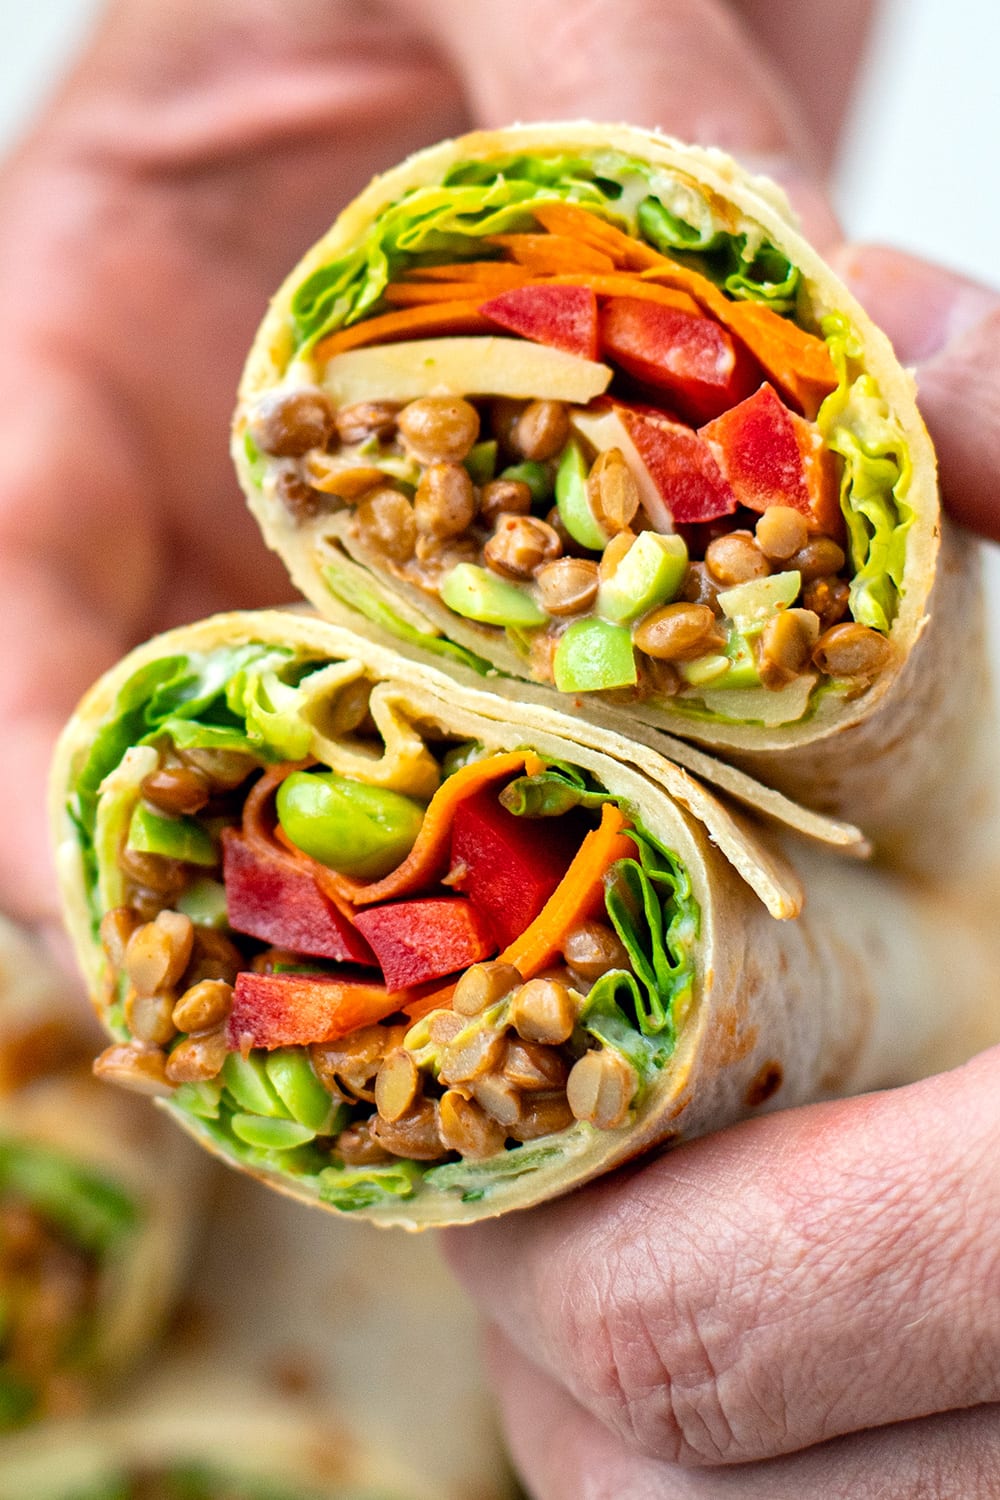 Healthy veggie wrap with high-protein foods